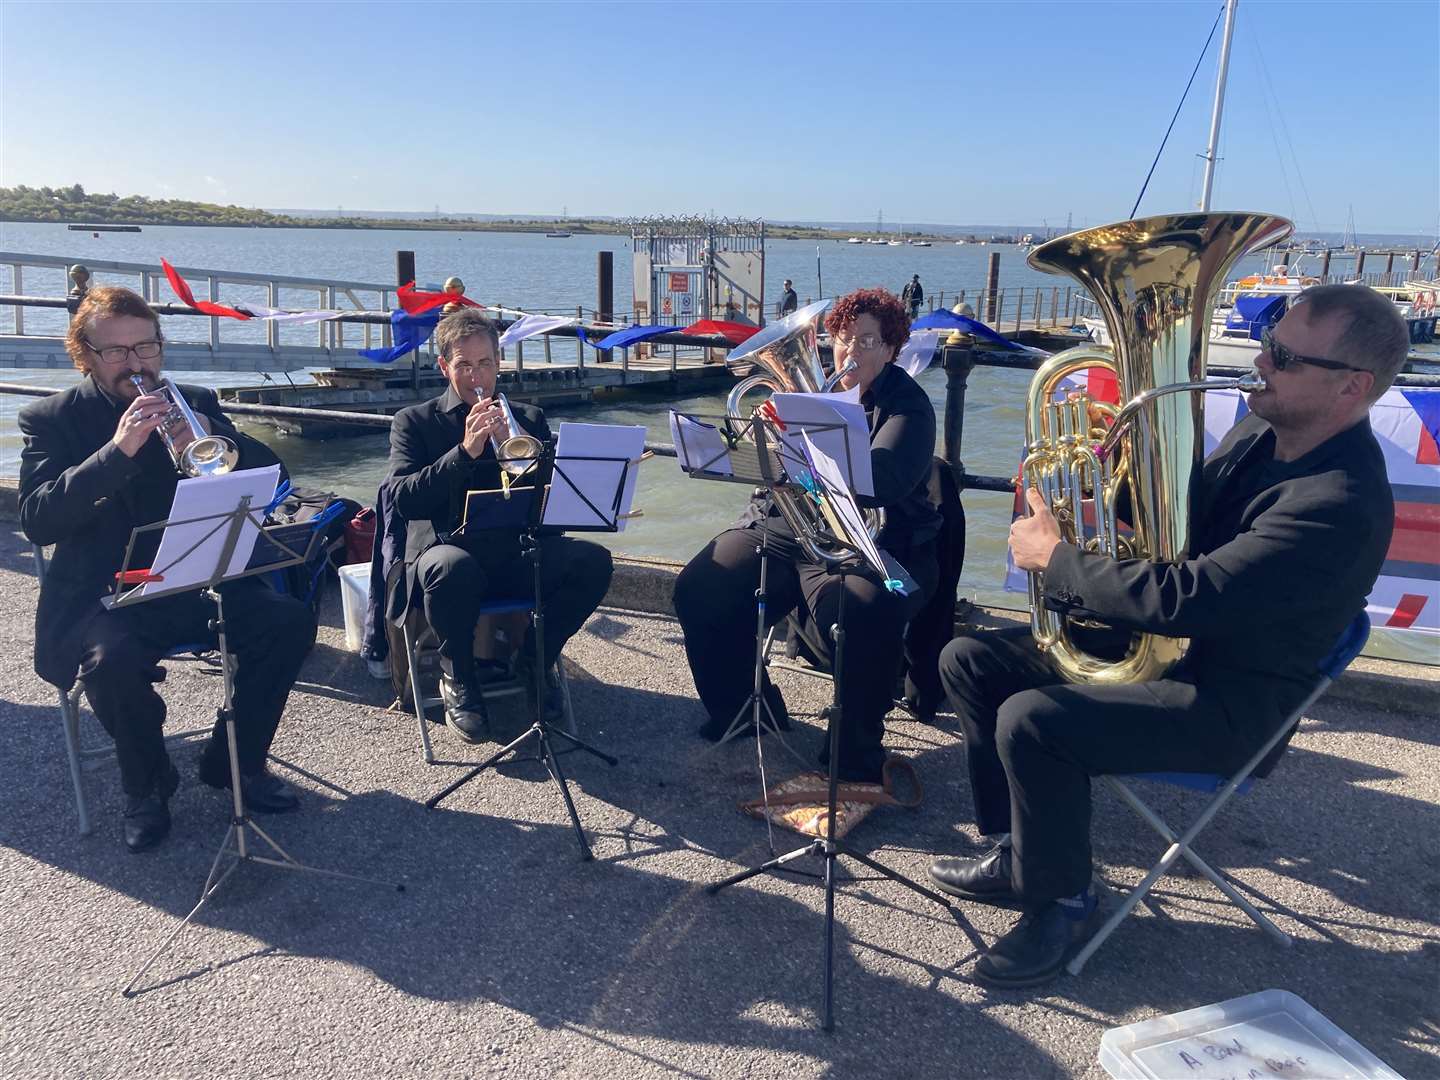 The Medway Band performed at the naming ceremony of Sheppey's new RNLI lifeboat the Judith Copping Joyce at Crundall's Wharf, Queenborough